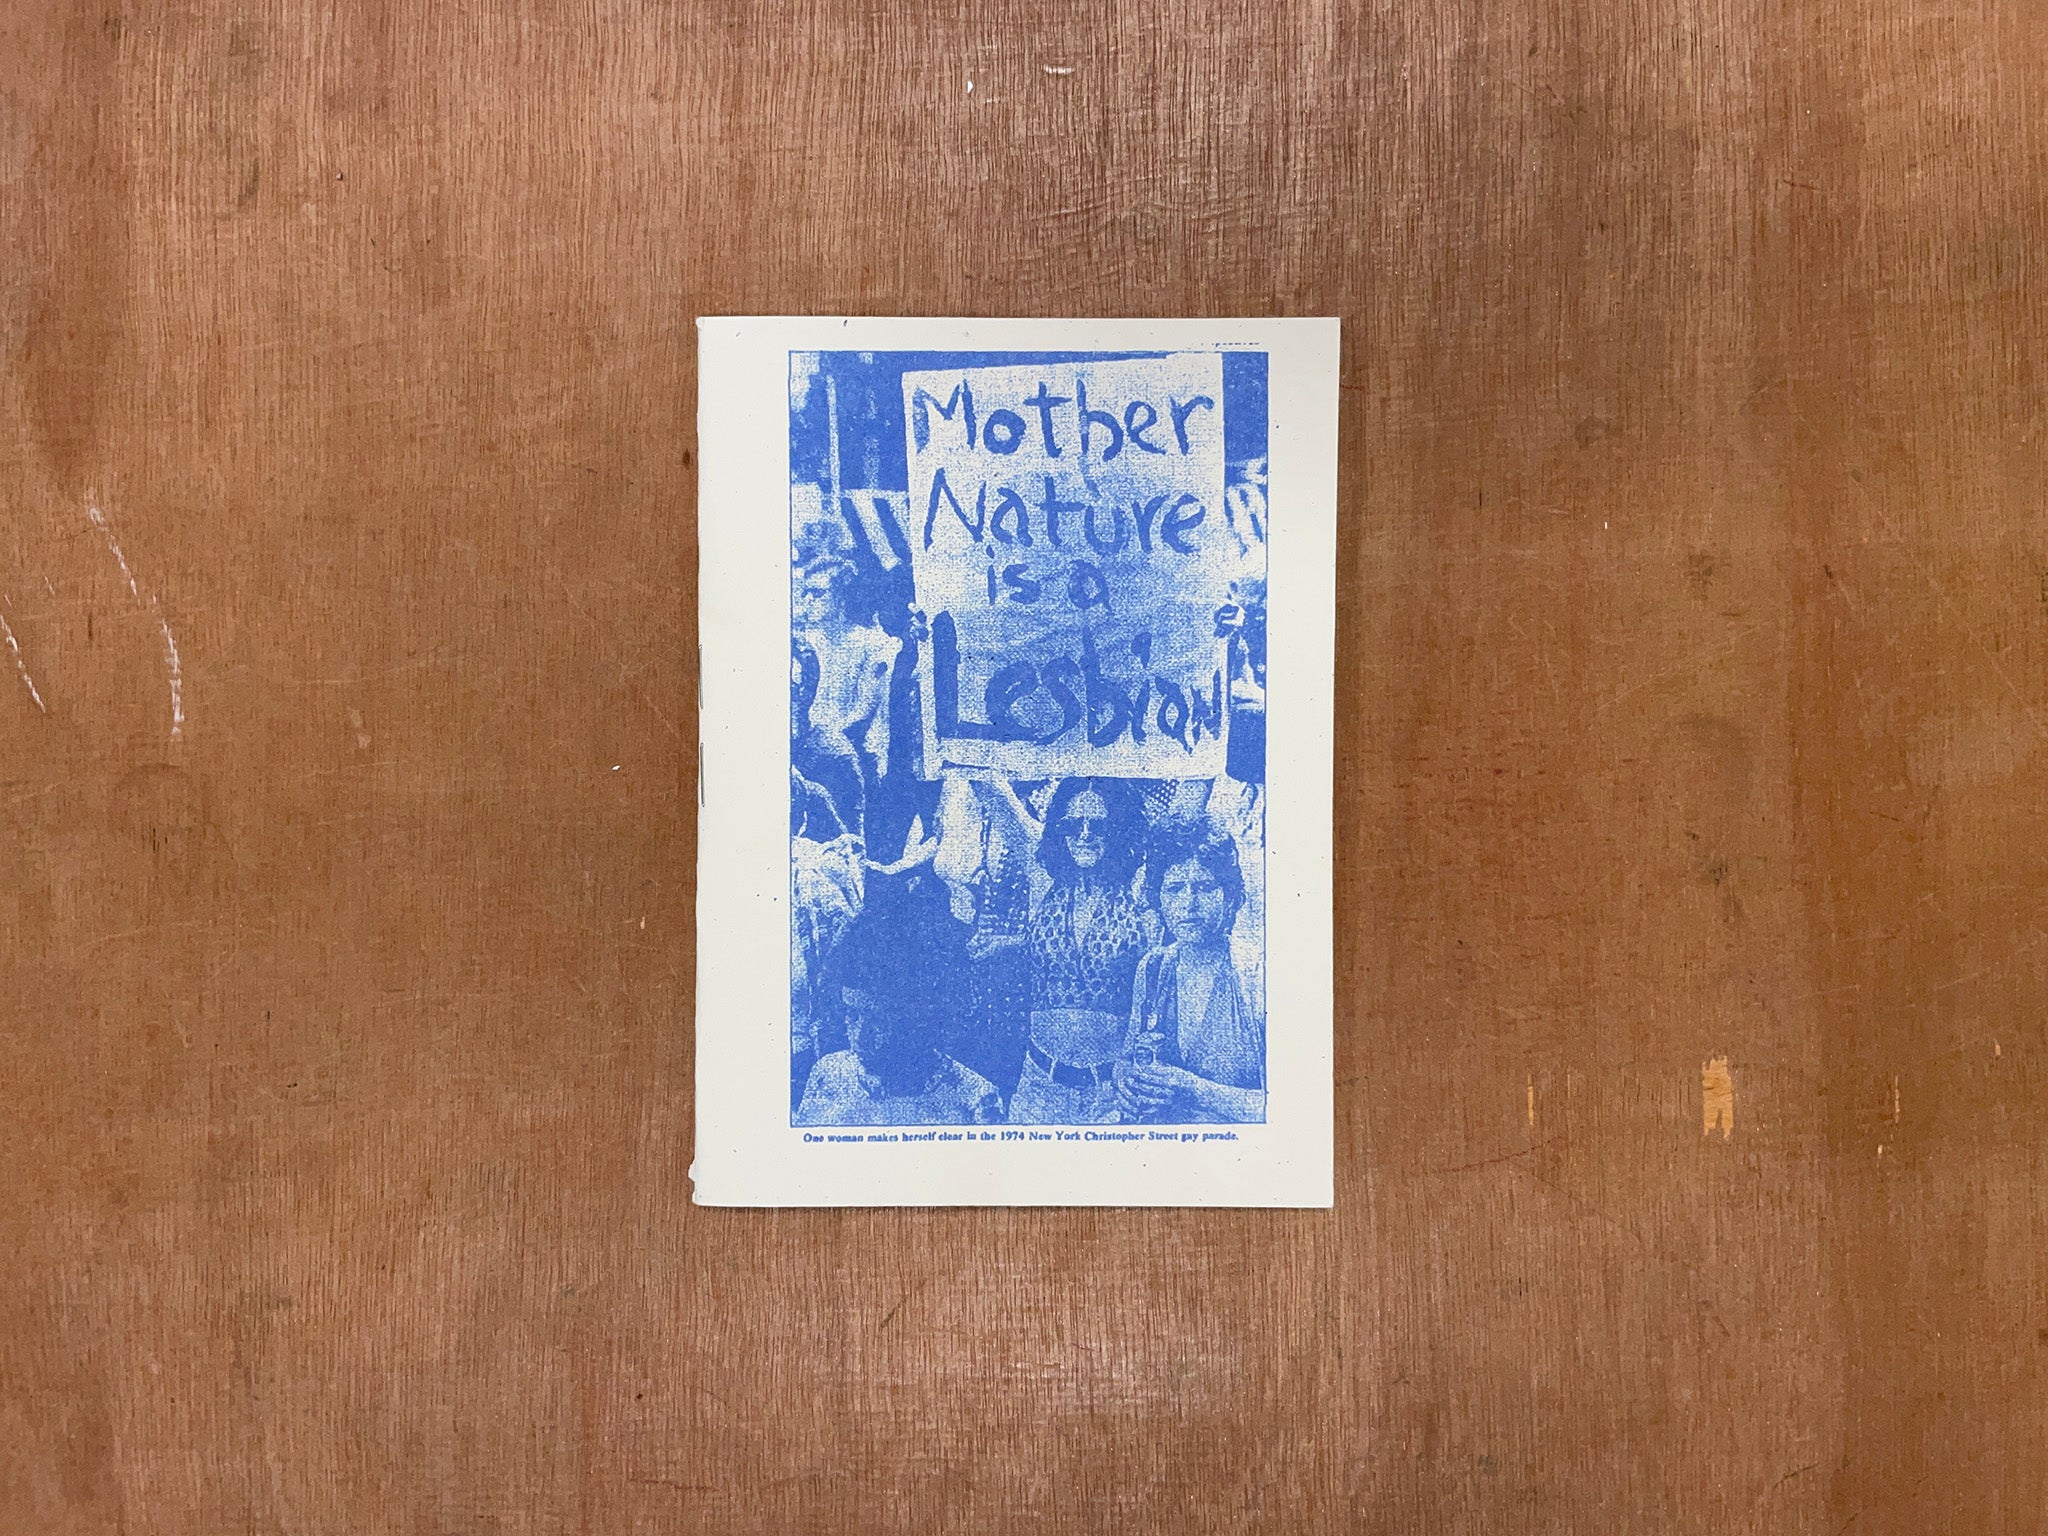 MOTHER NATURE IS A LESBIAN by Be Oakley